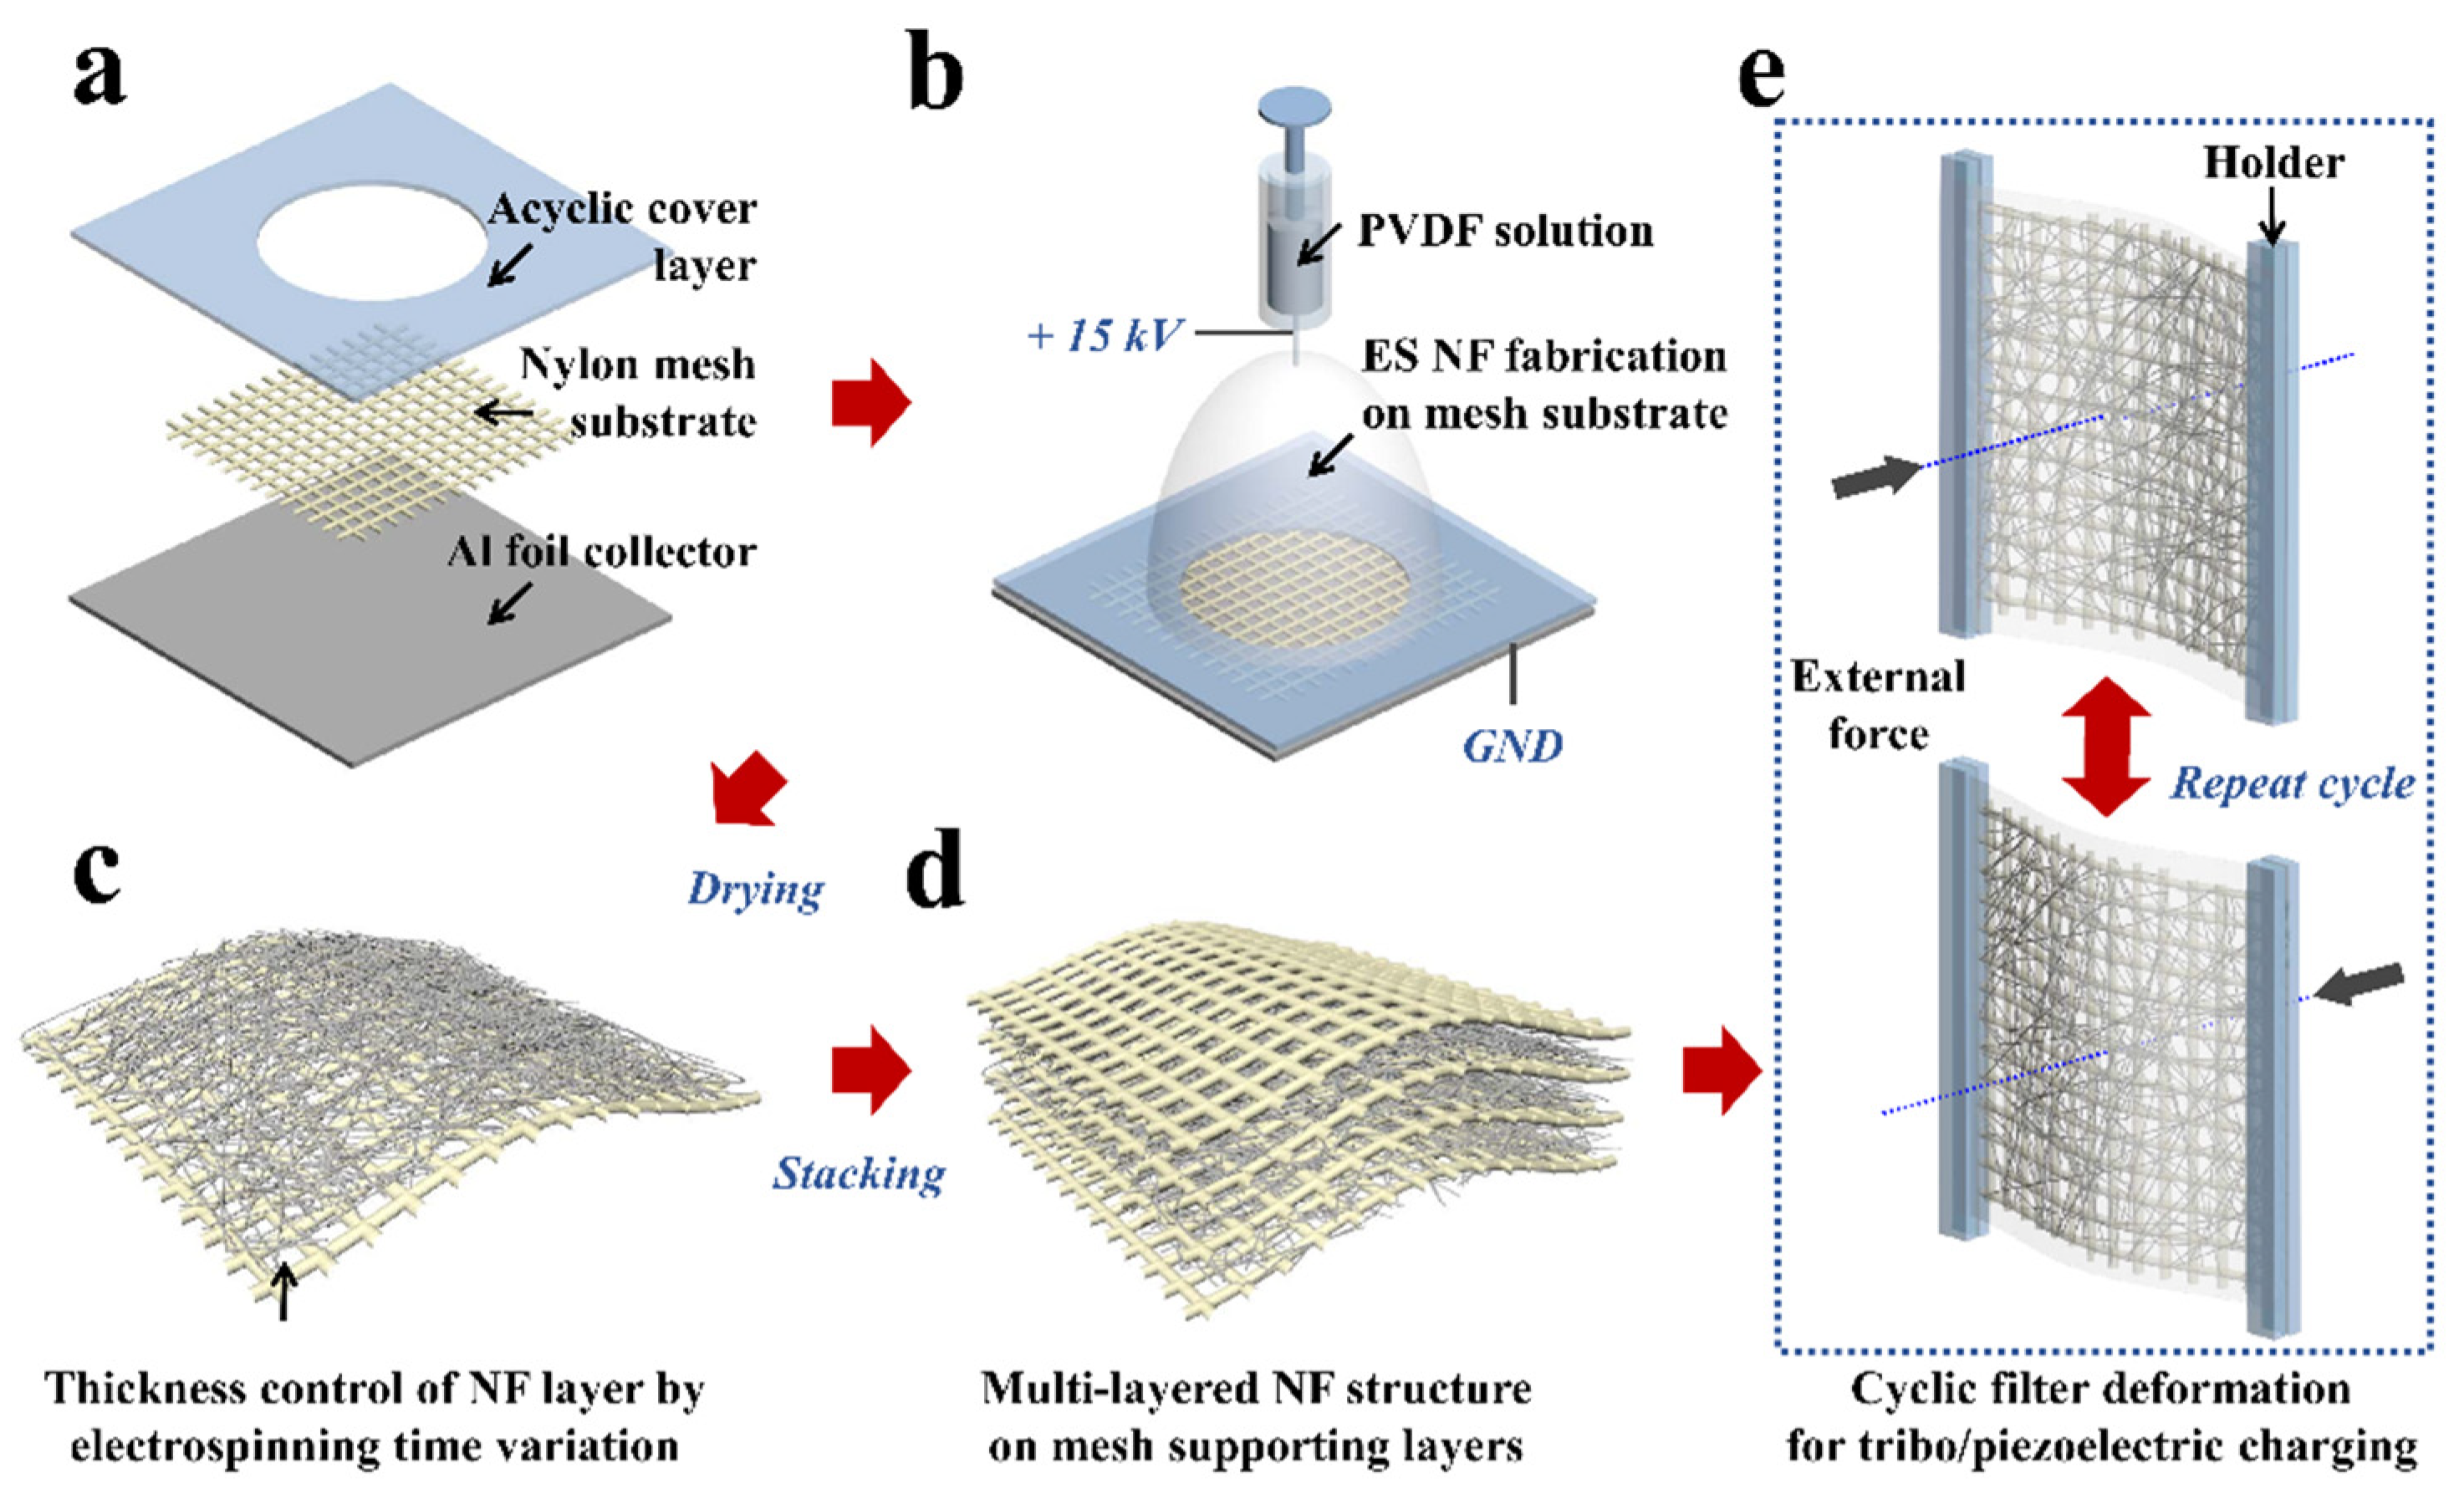 Polymers | Free Full-Text | Electrostatic Charge Retention in PVDF  Nanofiber-Nylon Mesh Multilayer Structure for Effective Fine Particulate  Matter Filtration for Face Masks